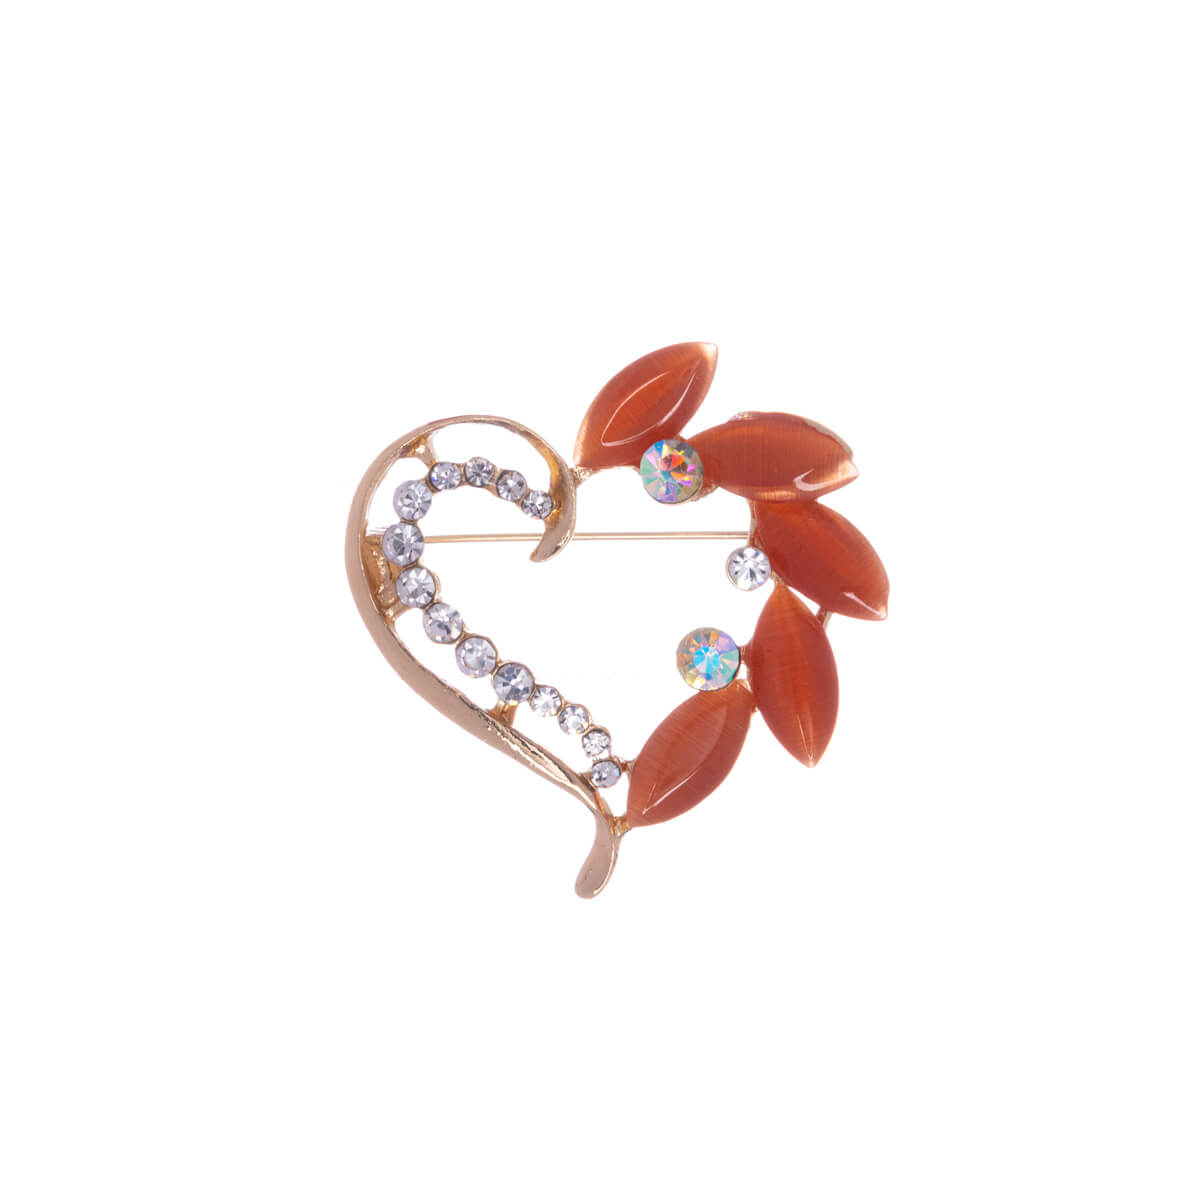 A glittering flower of the heart of the brooch